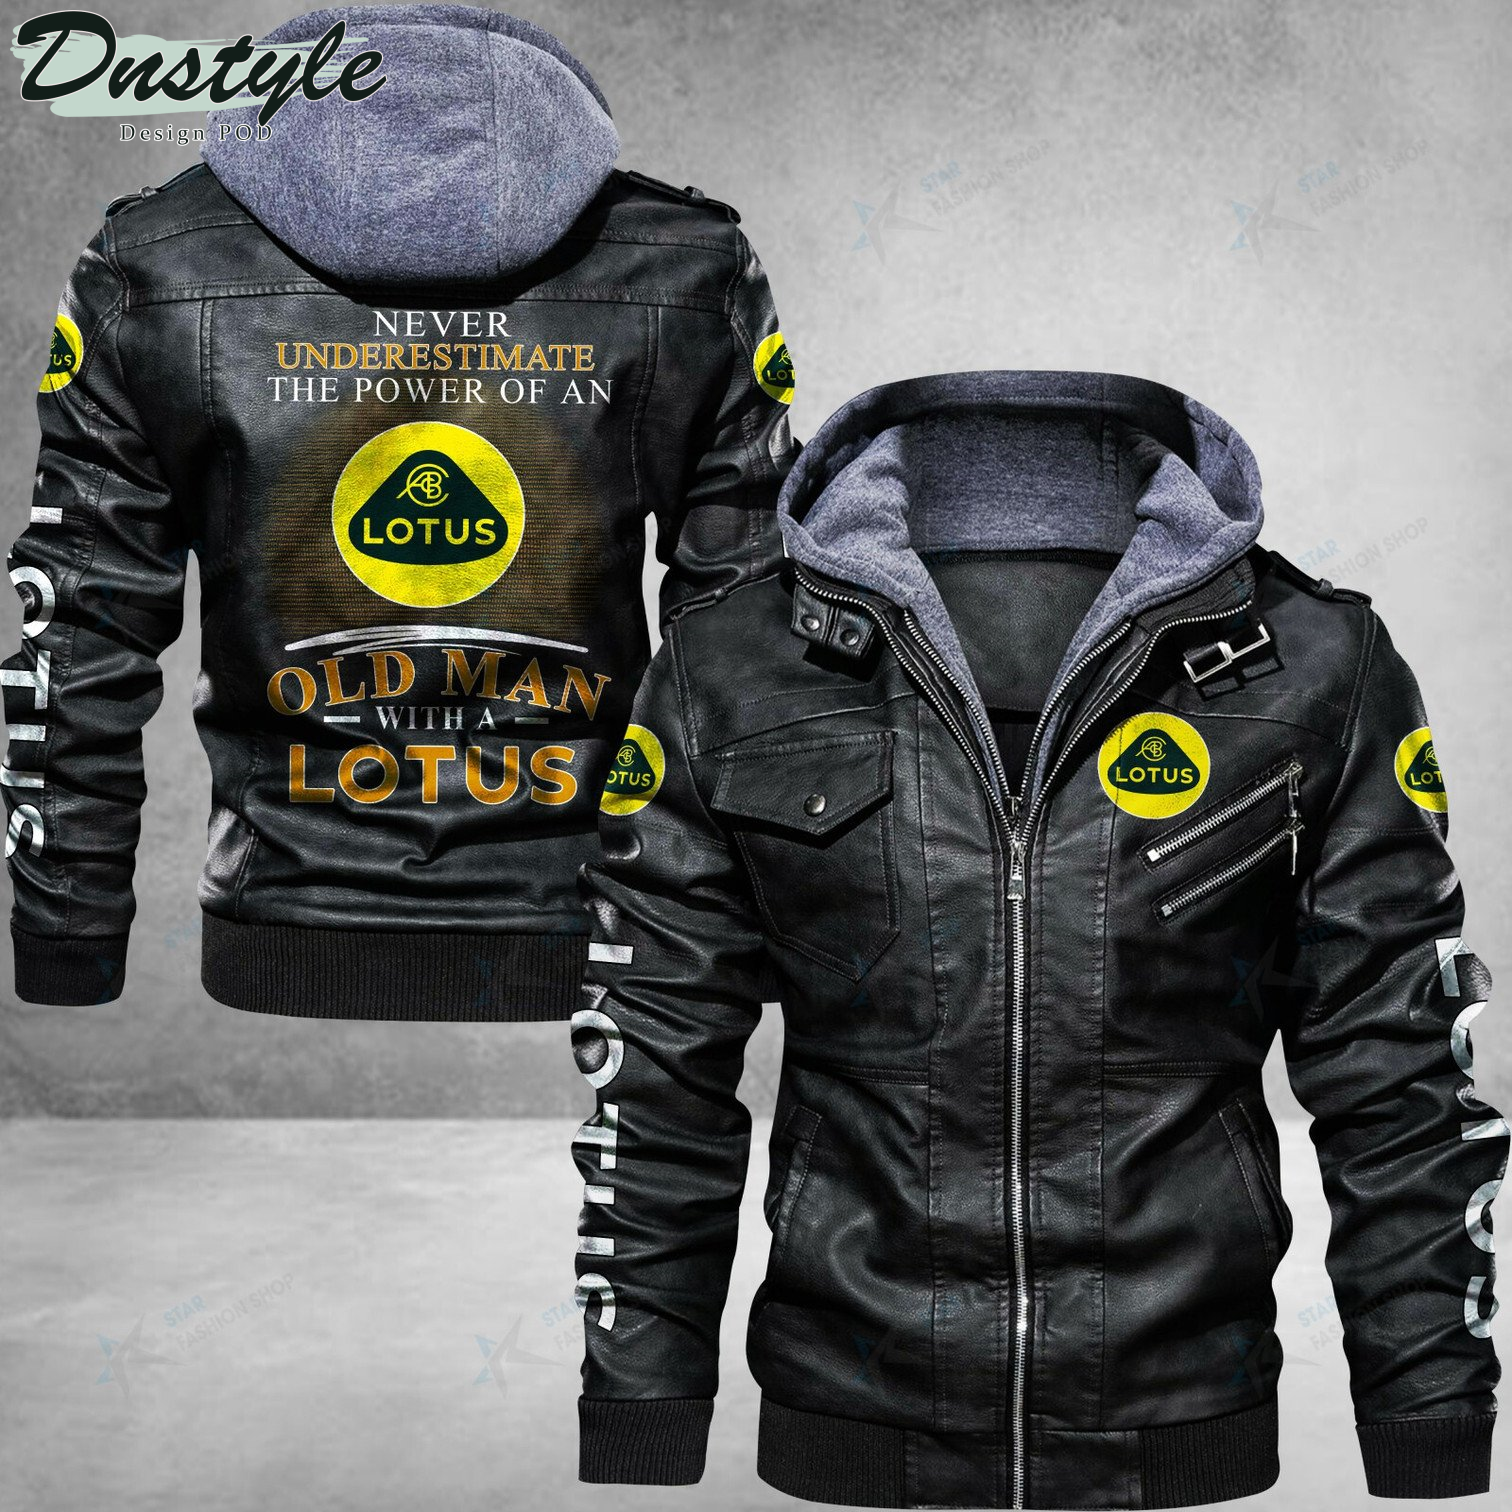 Lotus never underestimate the power of an old man leather jacket